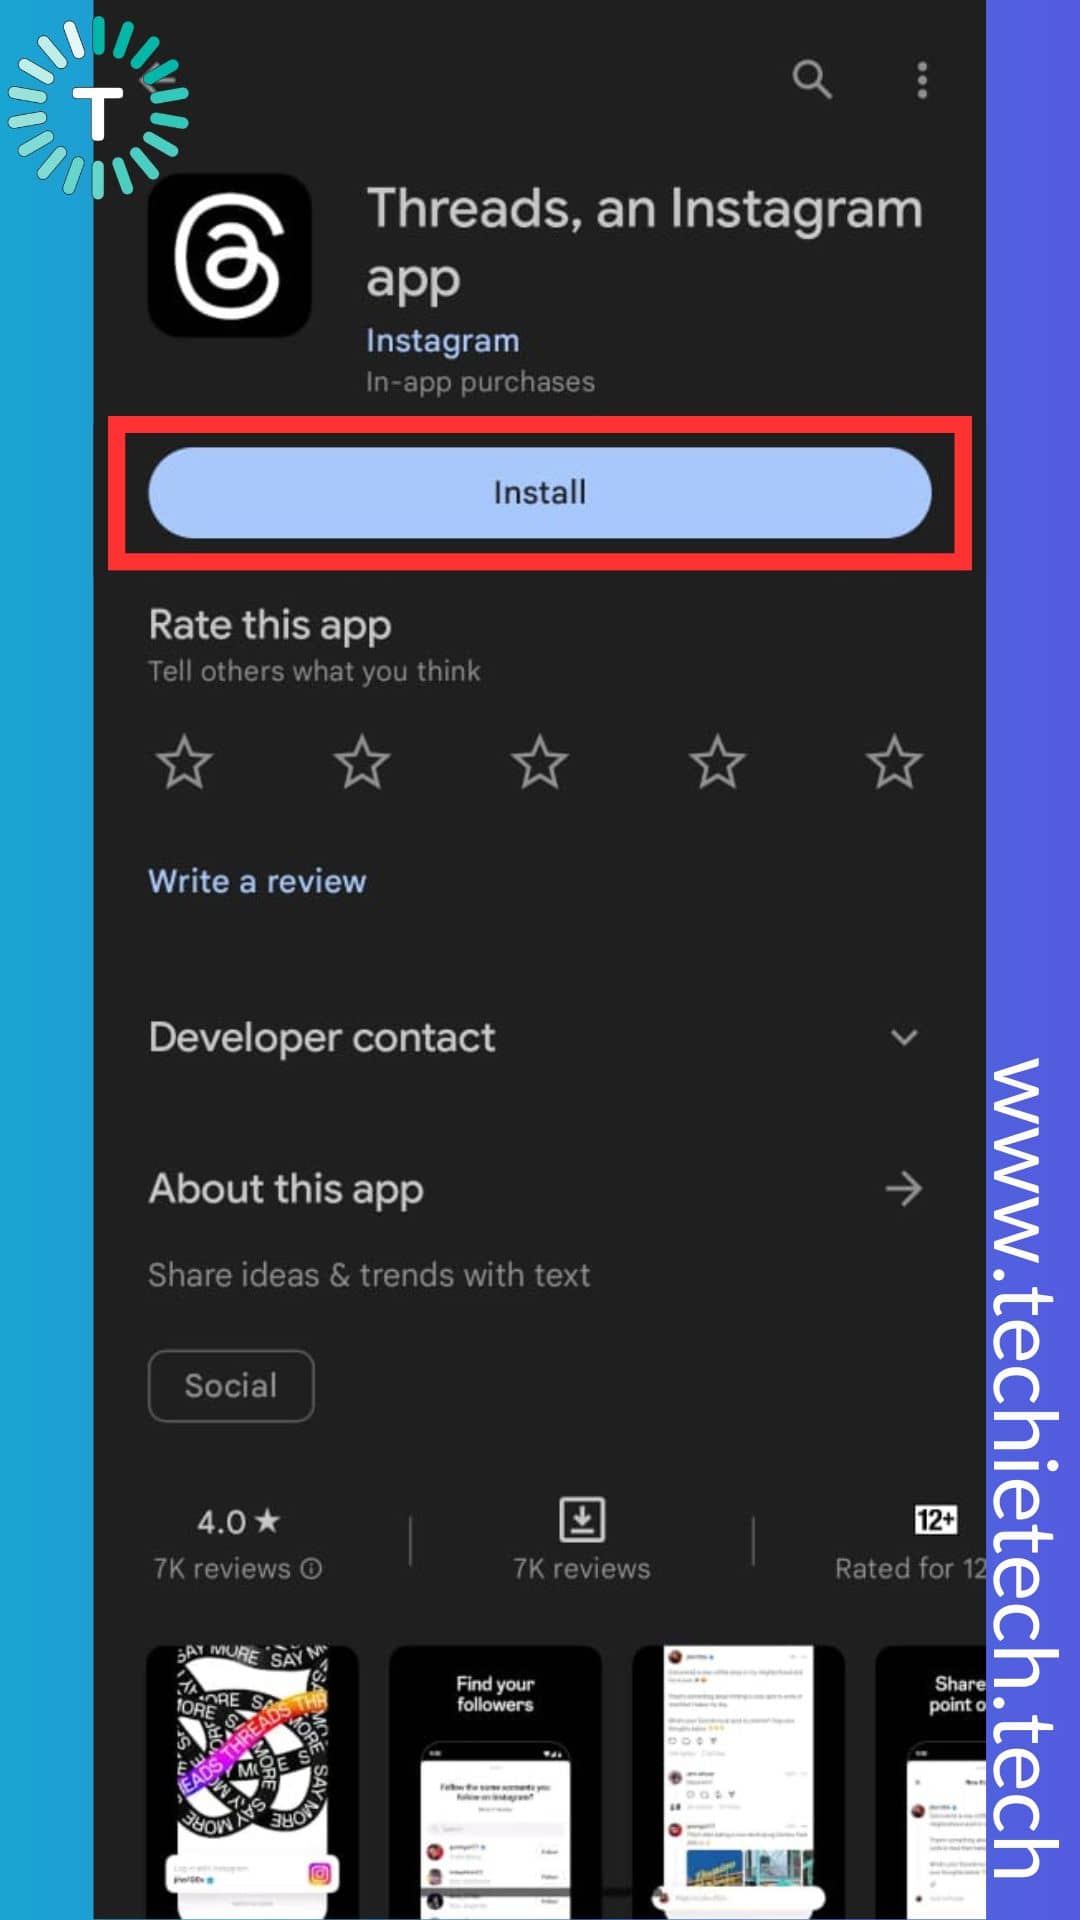 Search Threads and tap Install